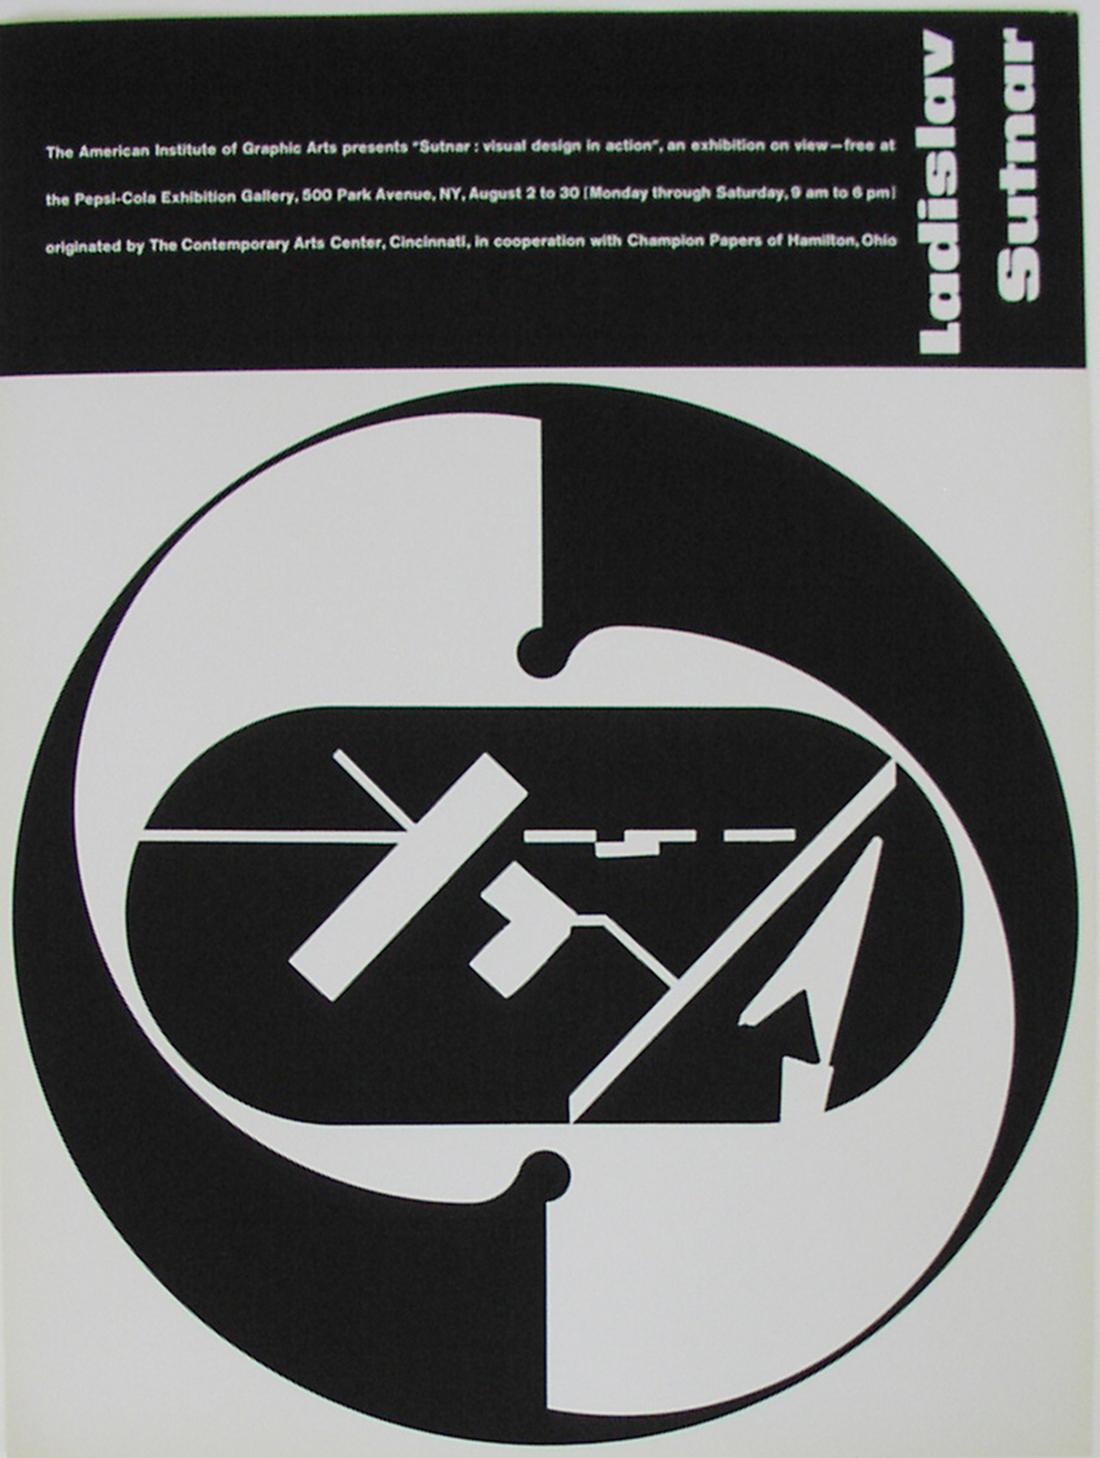  Sutnar, Ladislav Abstract Print - Poster designed by Sutnar for the exhibition Sutnar: visual design in action.